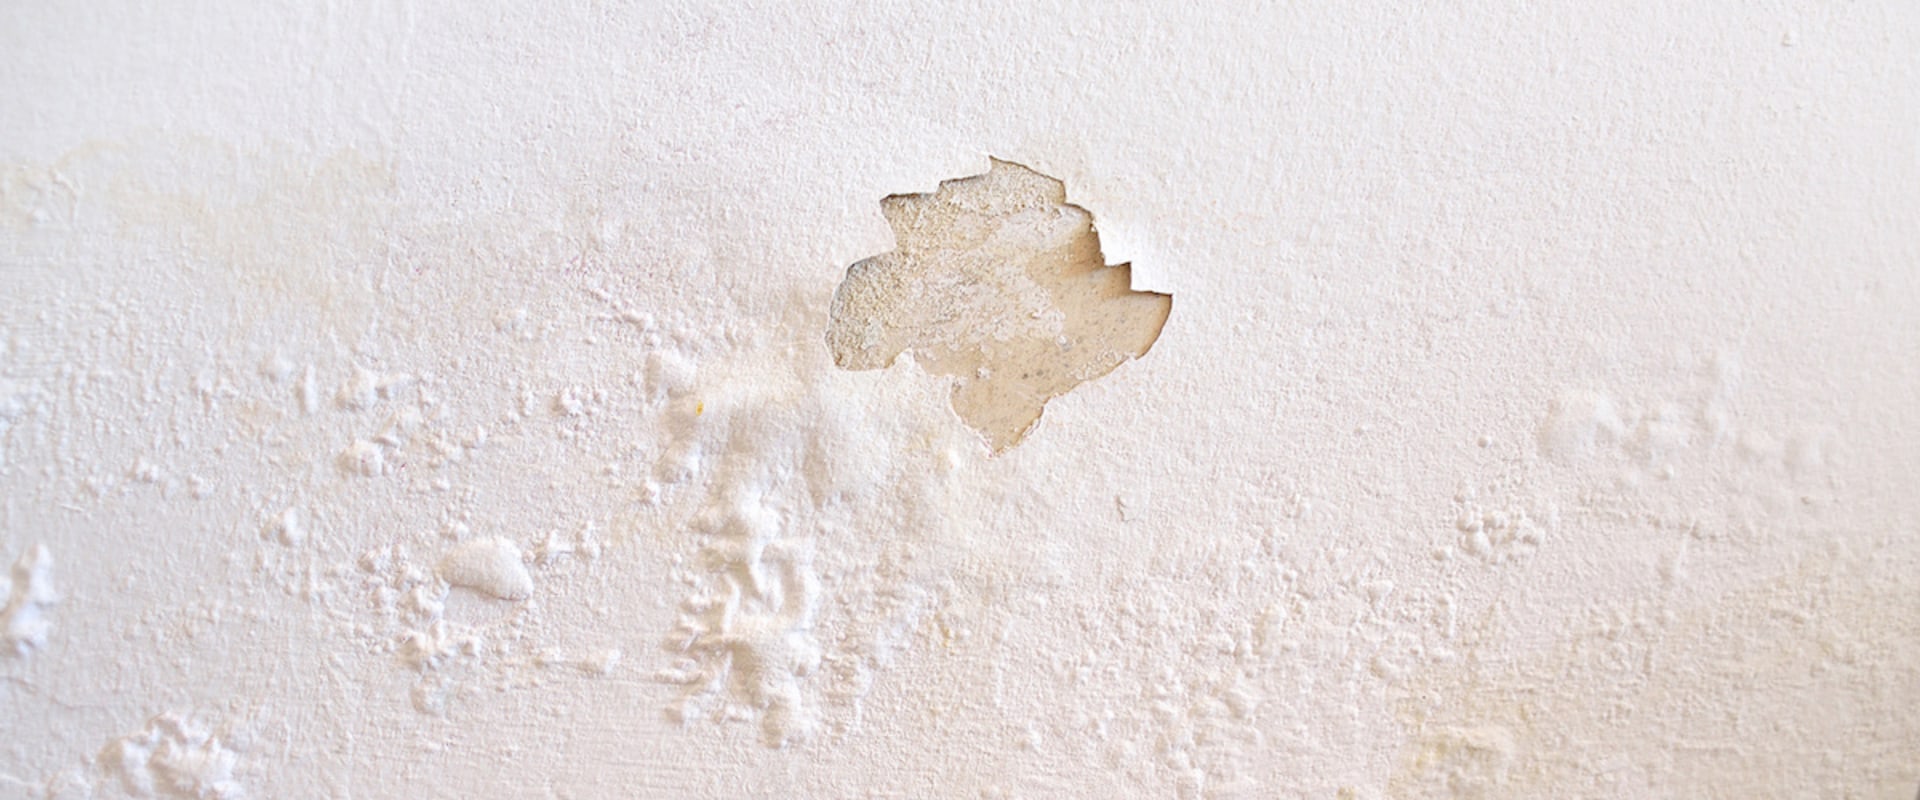 How do you treat water damaged walls?